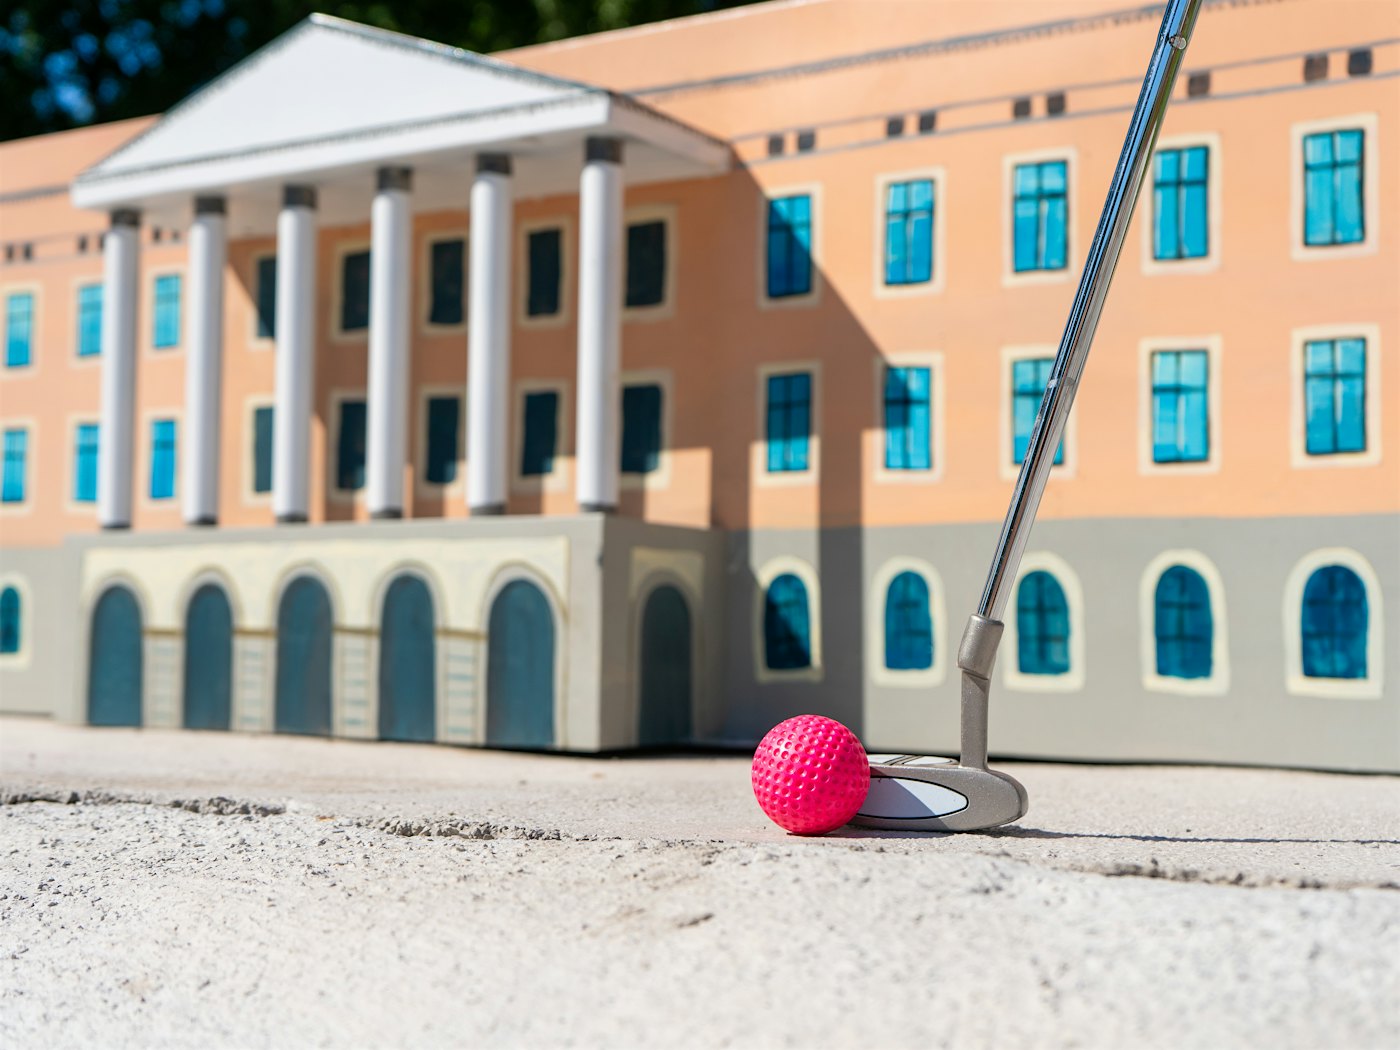 Mini golf with club and ball in front of a backdrop of the castle in Oslo. Photo